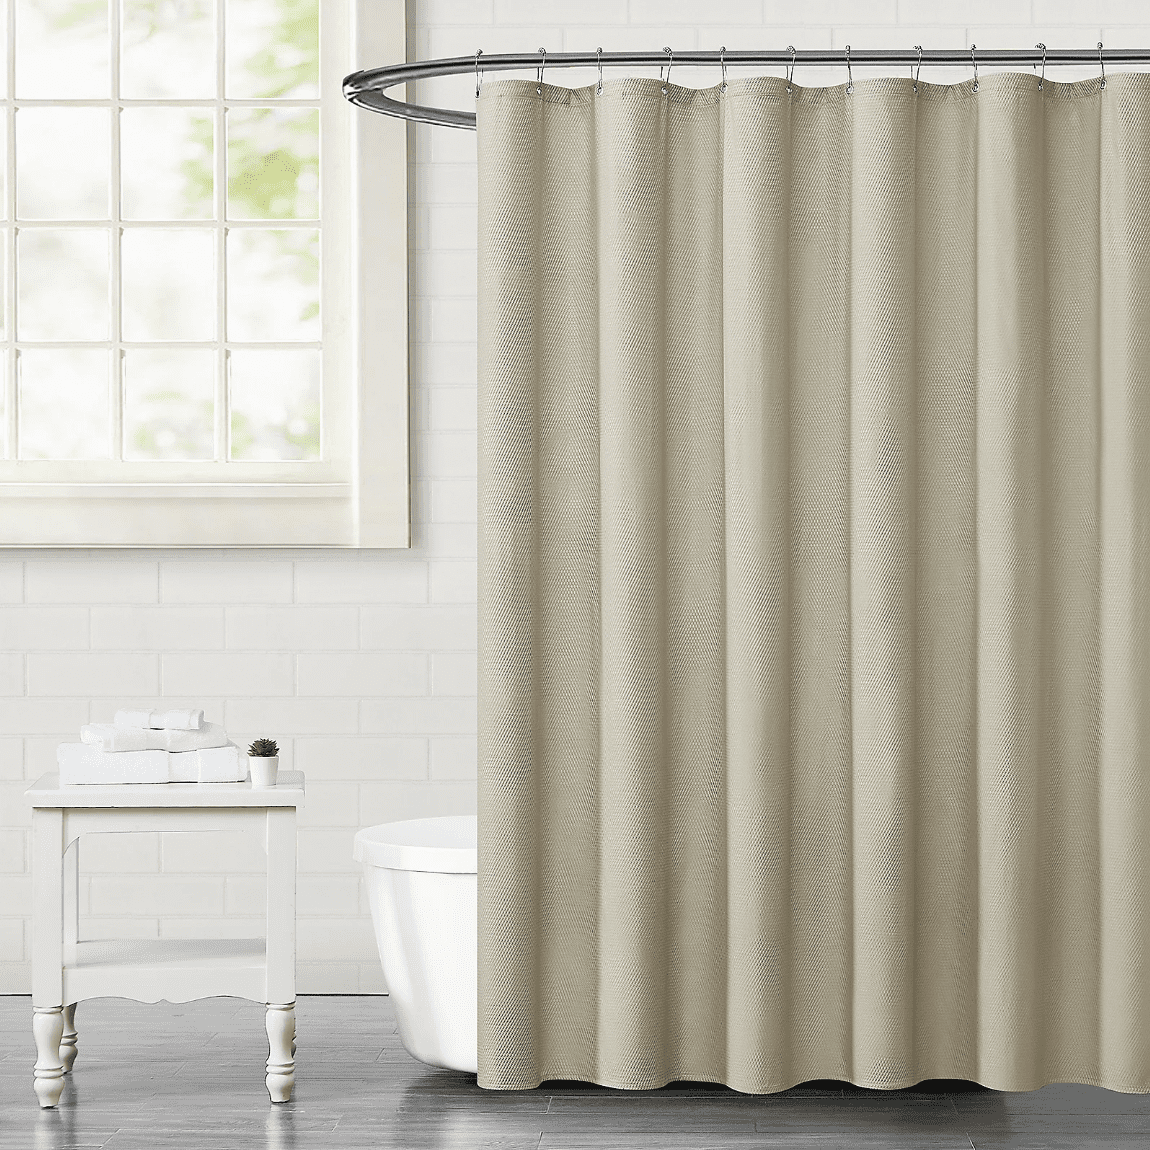 Best Shower Curtain Liners on : LOVTEX Liner with Pockets